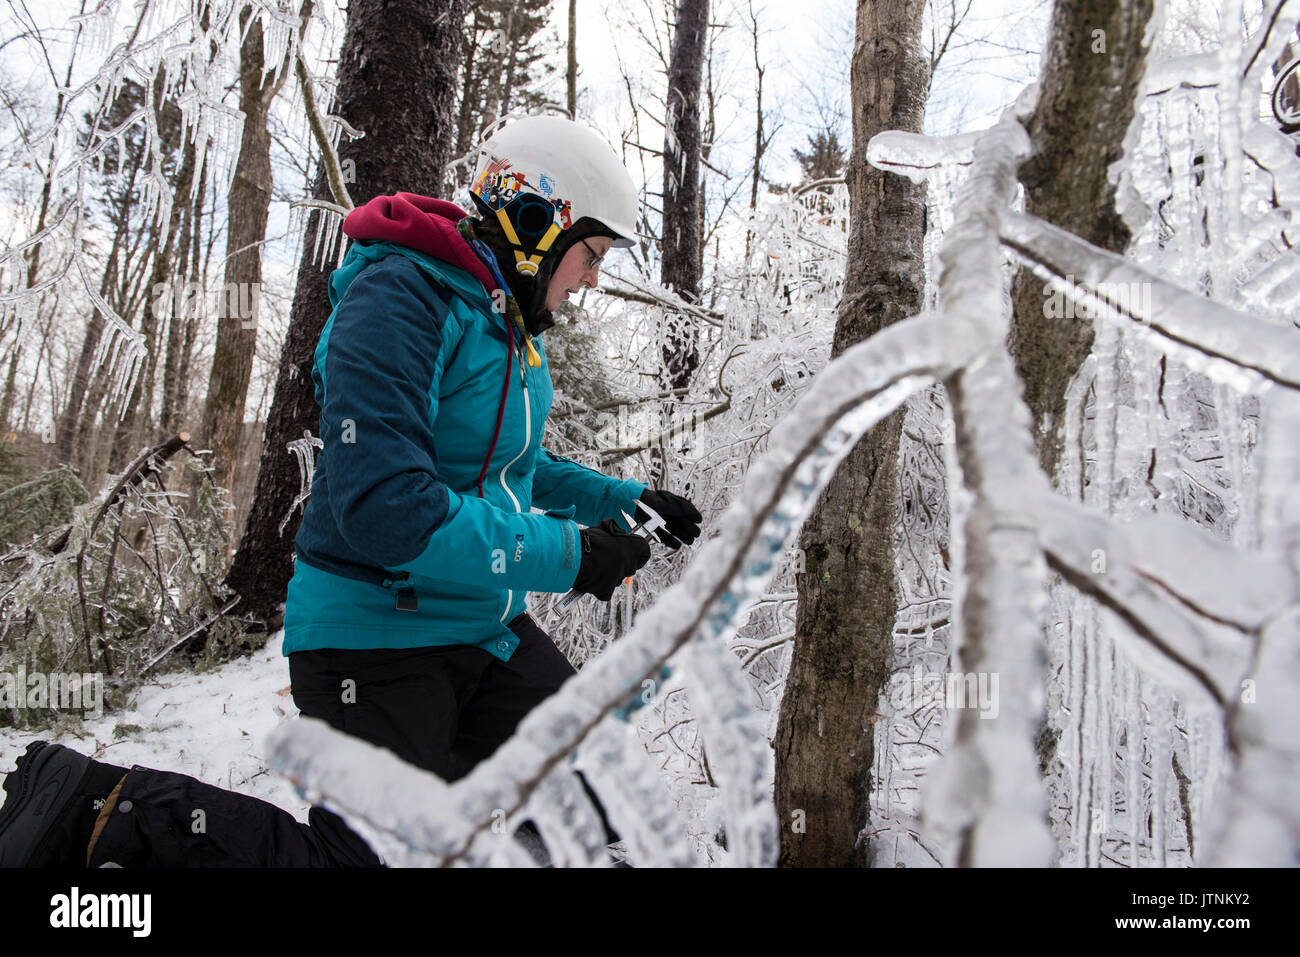 A team of researchers replicating an ice storm during winter in the White Mountains of New Hampshire. The team is studying the effects of ice storms on soil, trees, birds and insects. Stock Photo